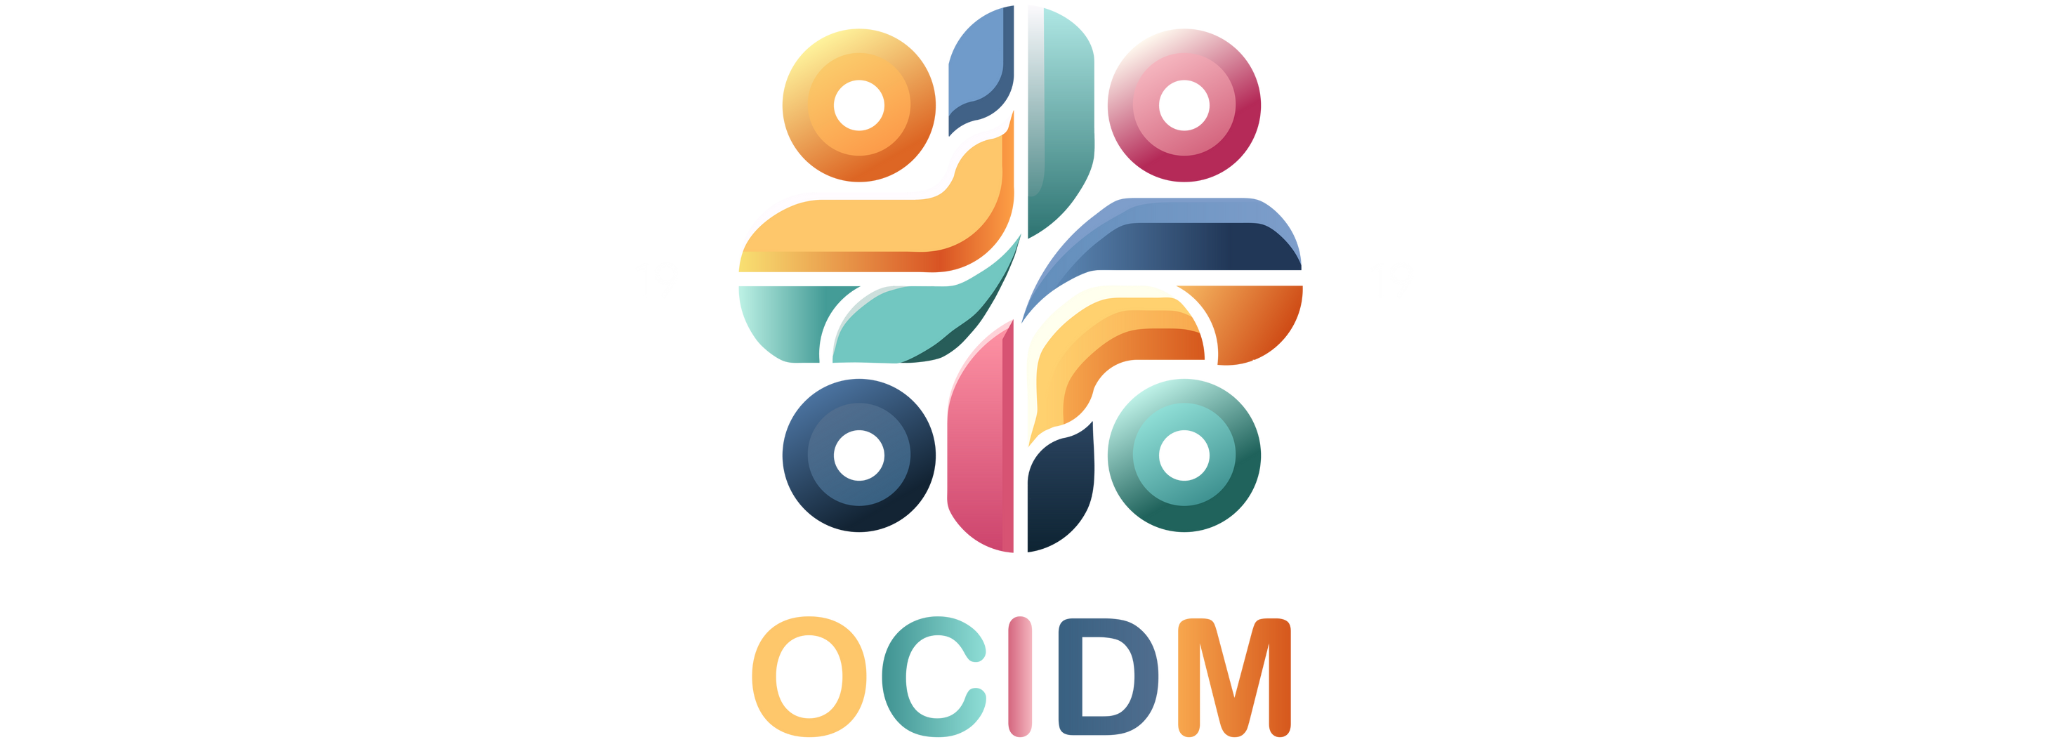 Abstract logo design with colorful, intertwined shapes and the text "OCIDM" below. The numbers "19" are positioned on each side of the logo. Toronto Caribana Carnival: Ultimate Guide to Caribana Festival Events